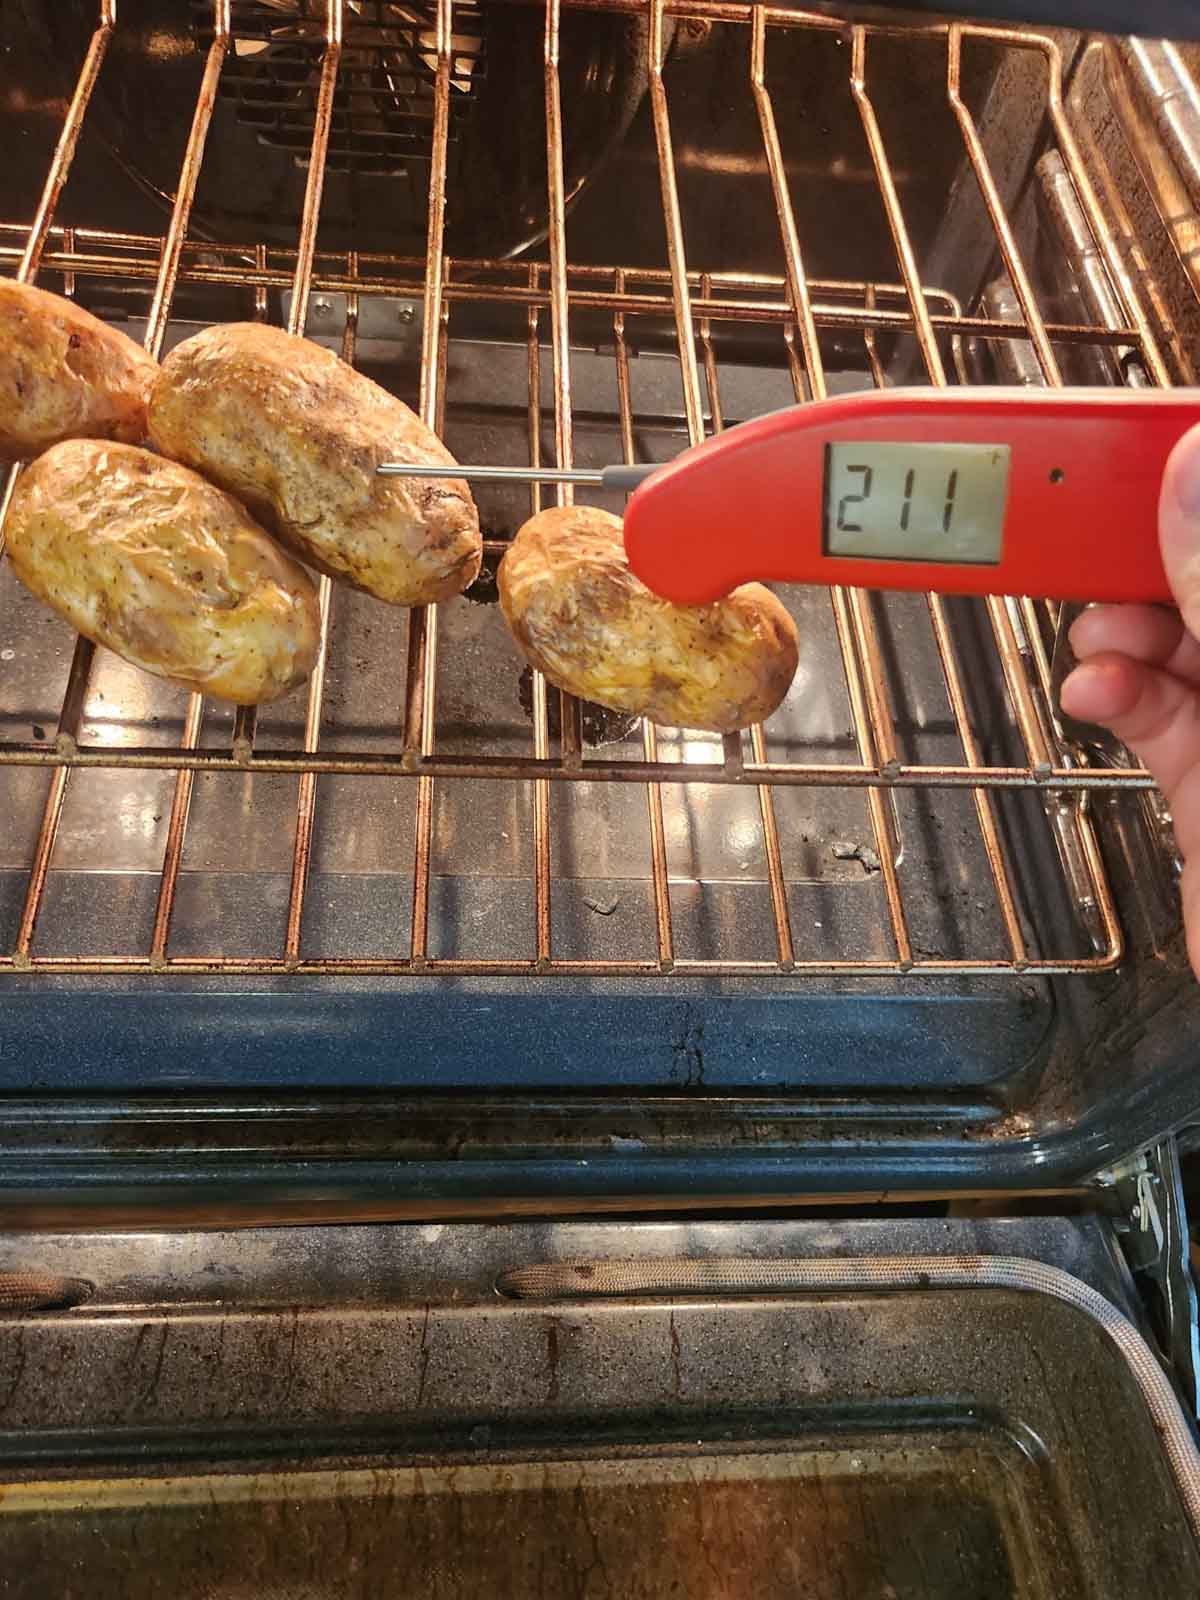 checking the temp of a baked potato with an instant read thermometer